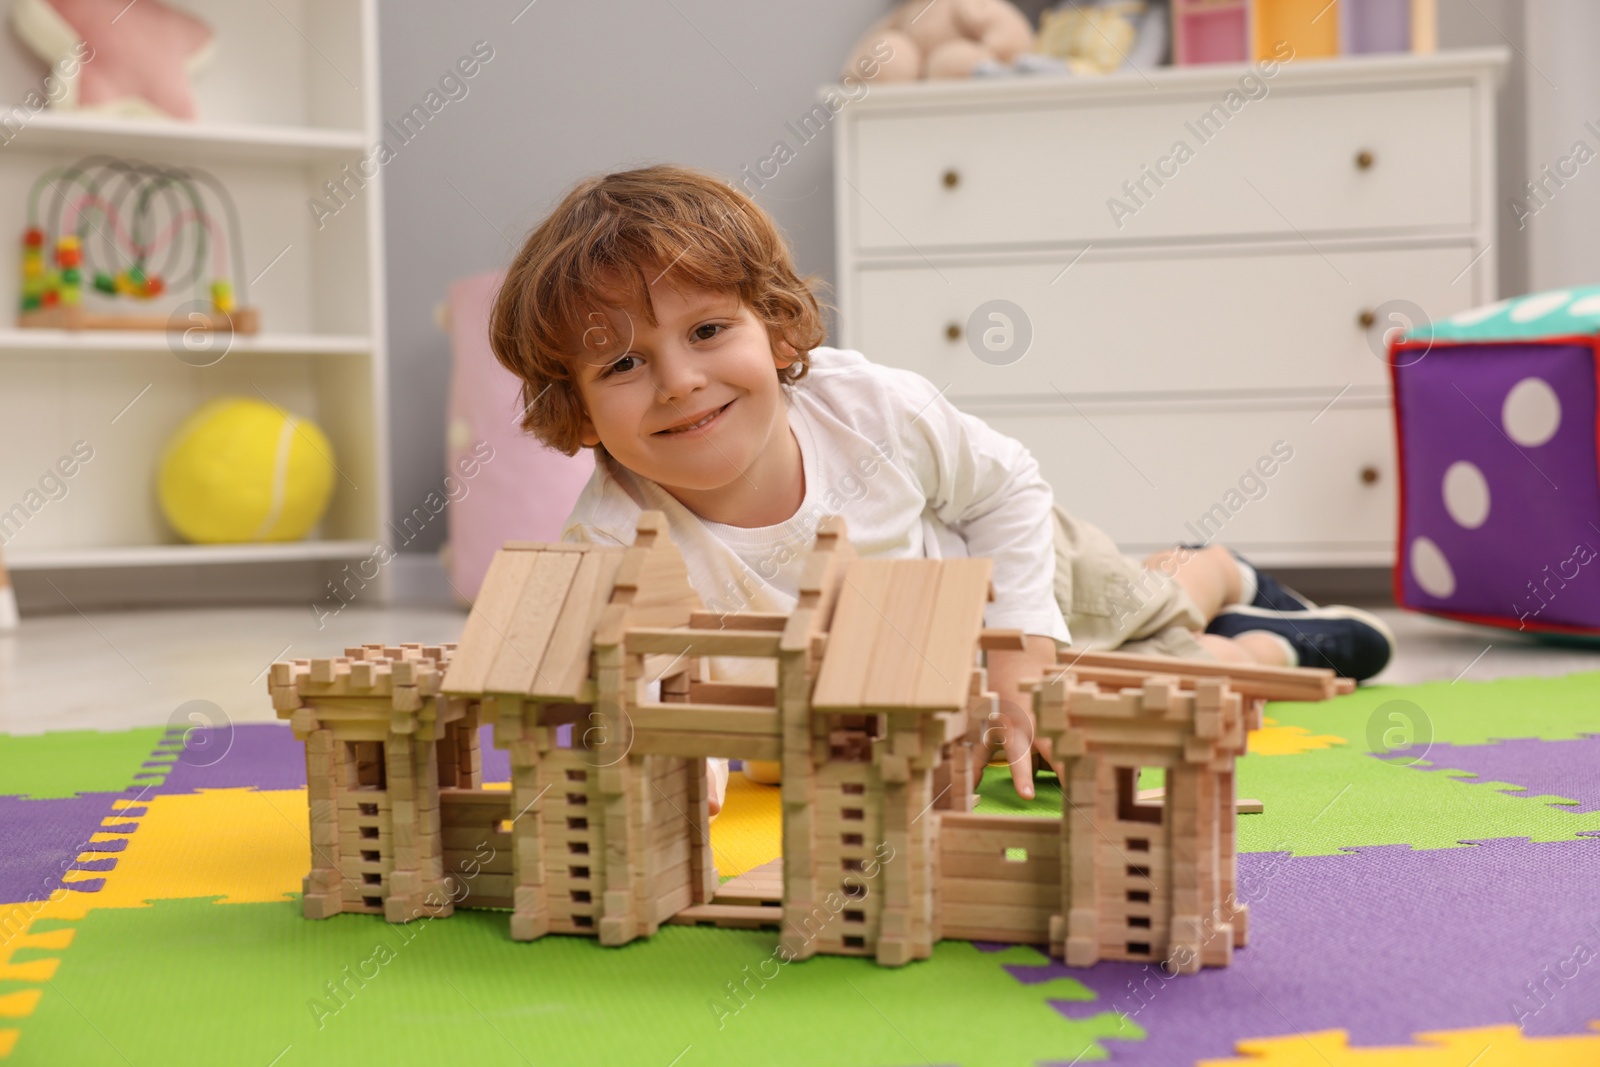 Photo of Little boy playing with wooden entry gate on puzzle mat in room. Child's toy